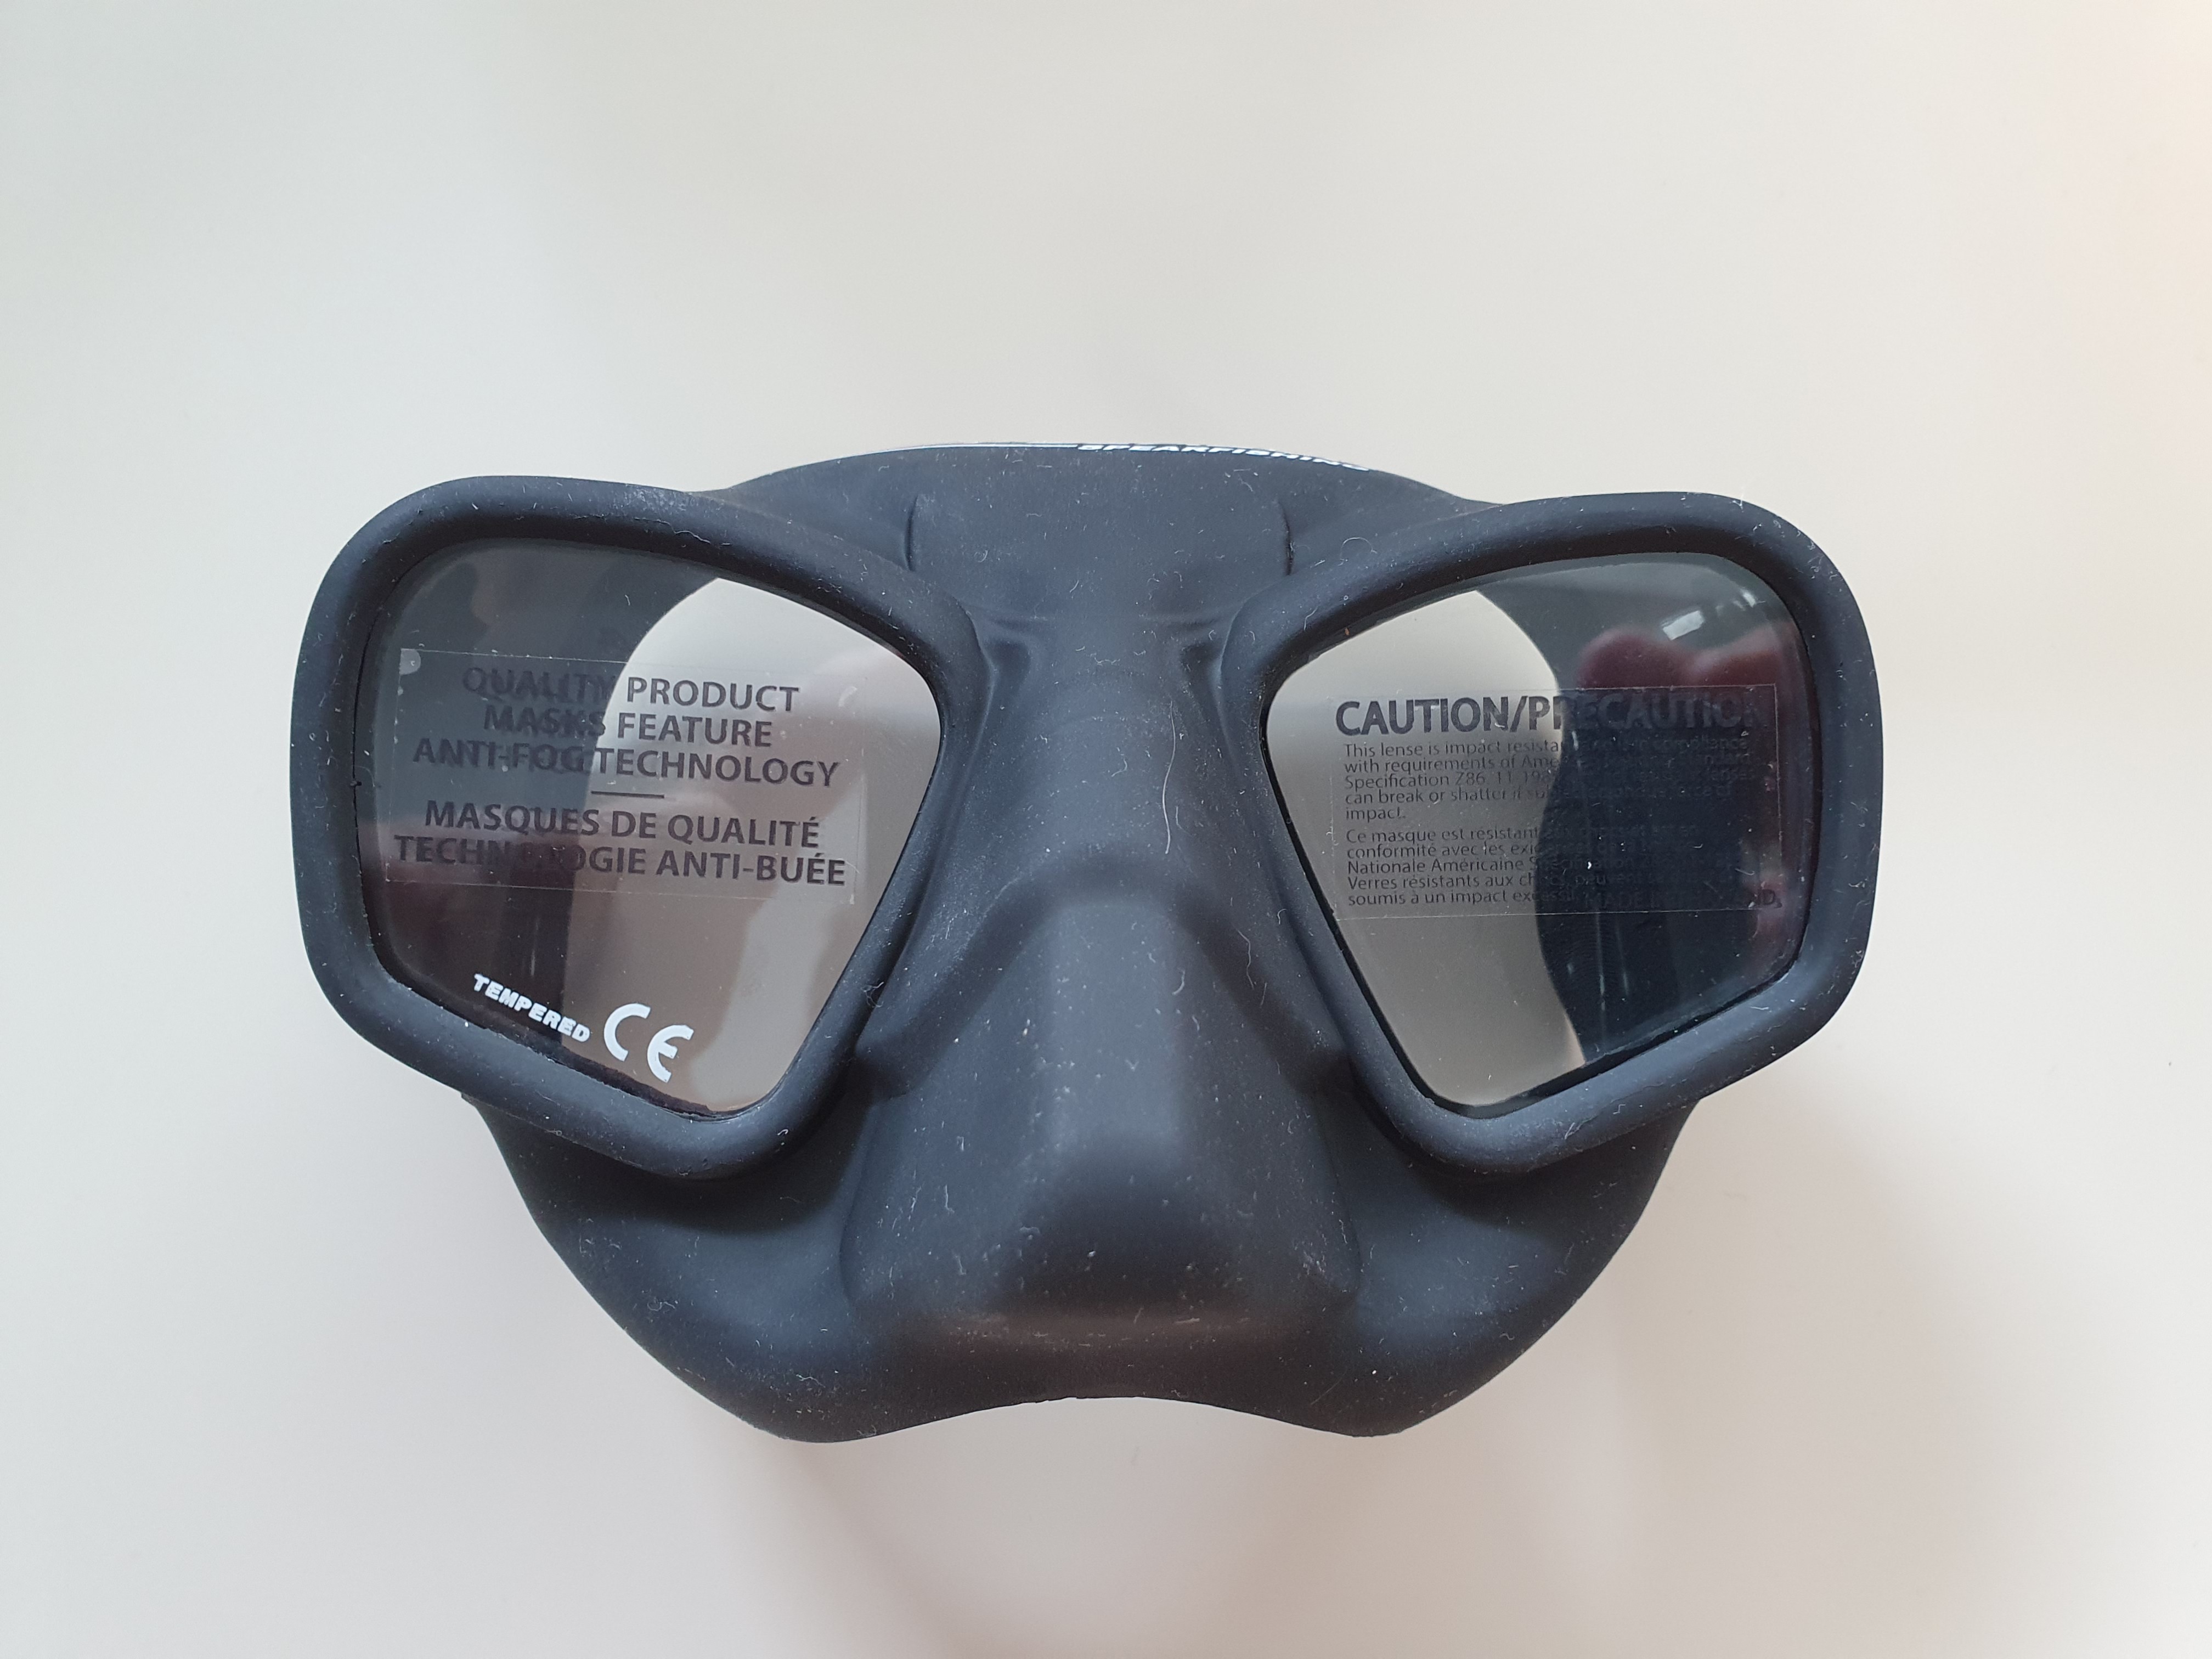 Epsealon seawolf mask for freediving or scuba diving brand new, Sports  Equipment, Sports & Games, Water Sports on Carousell